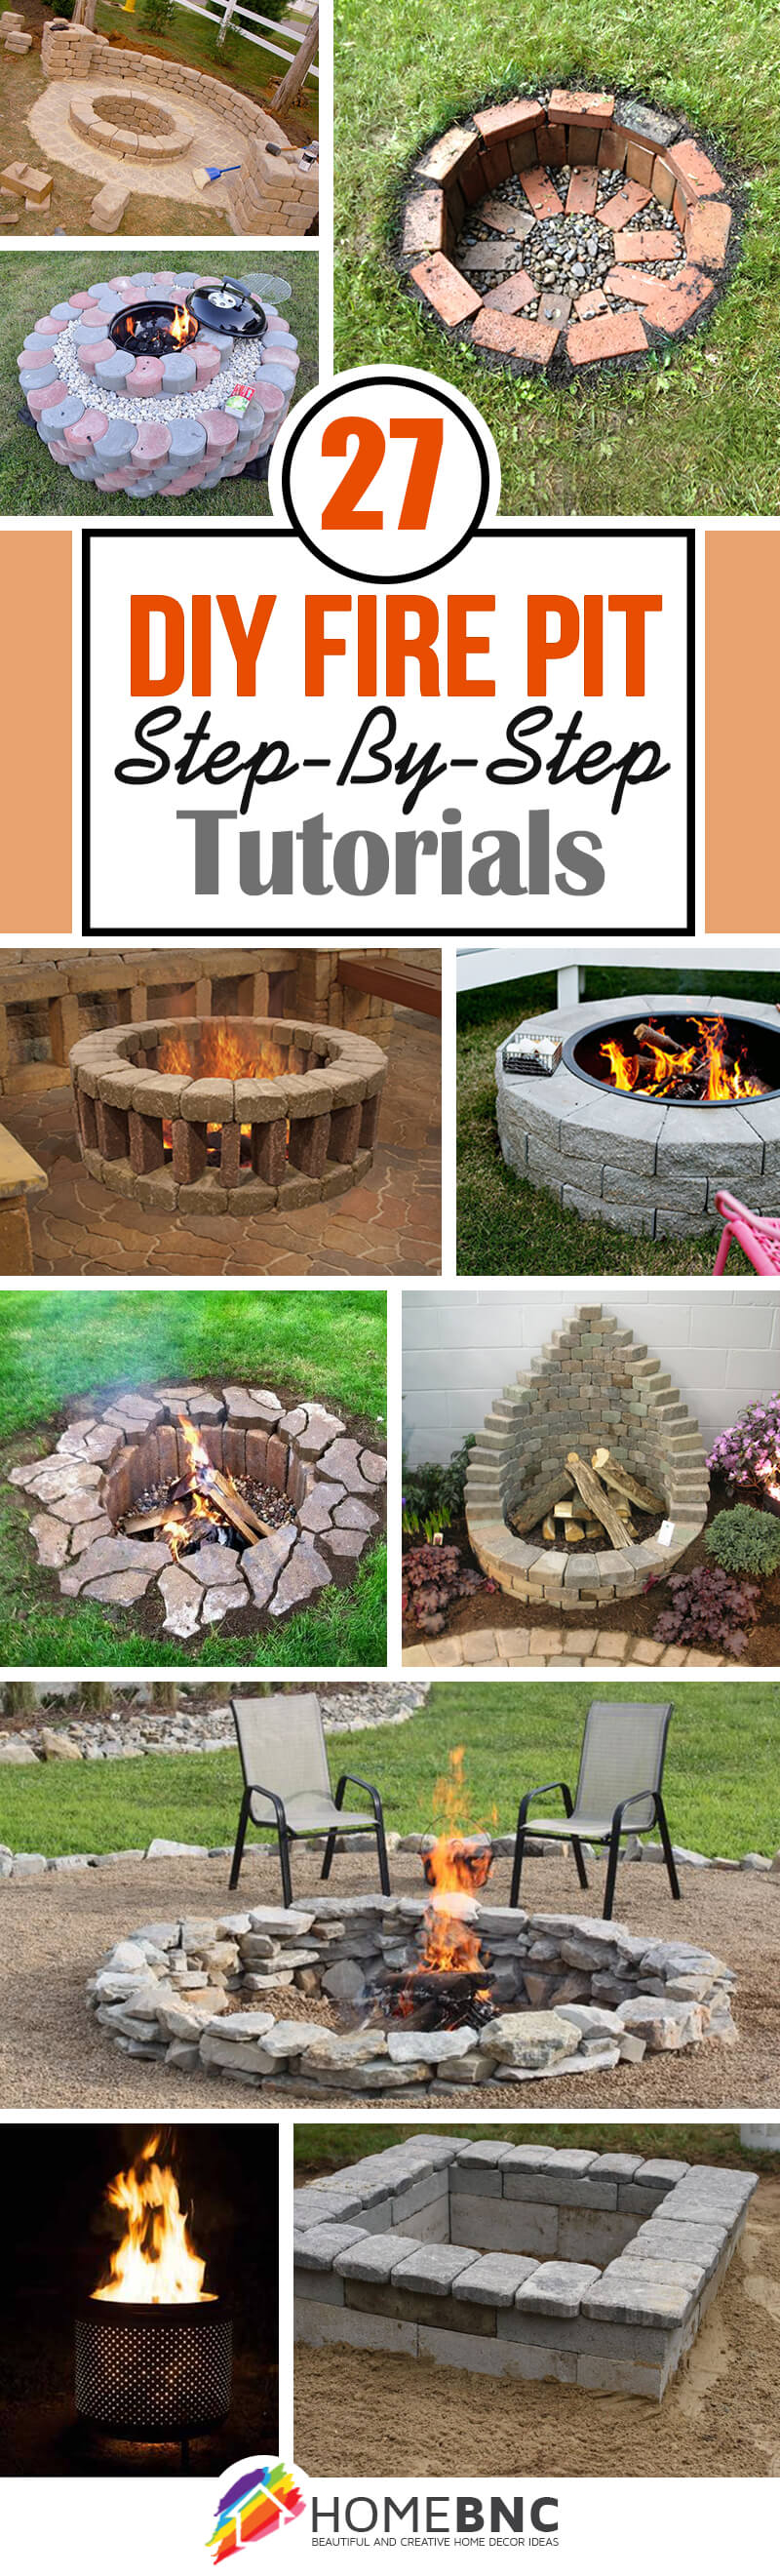 27 Best Diy Firepit Ideas And Designs, Build Your Own Gas Fire Pit Kit